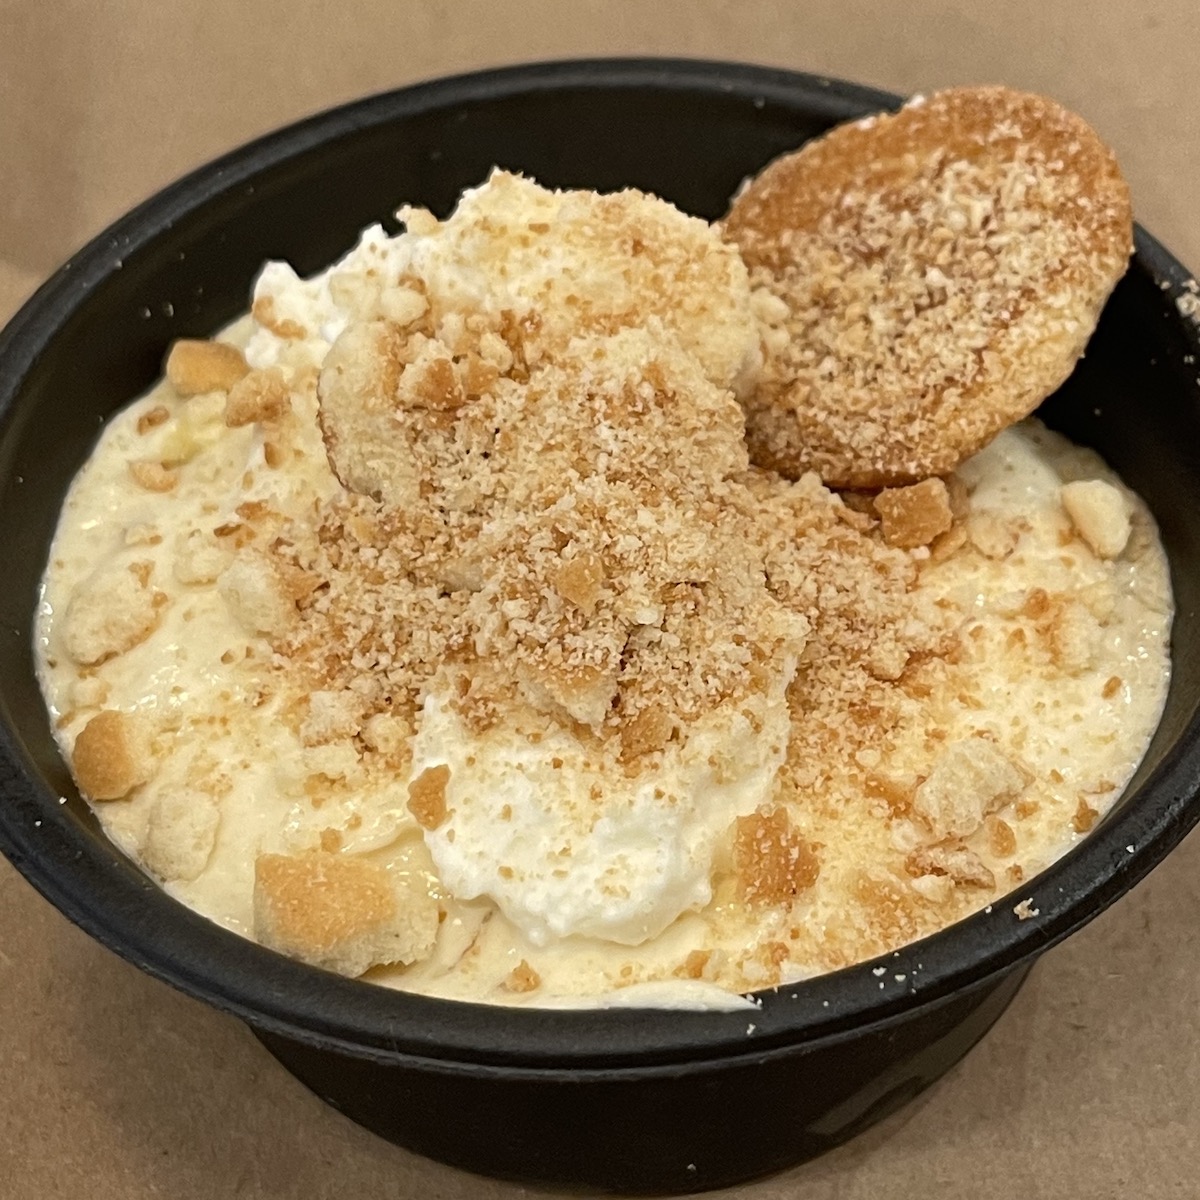 Banana Pudding from Mission BBQ in Doral, Florida